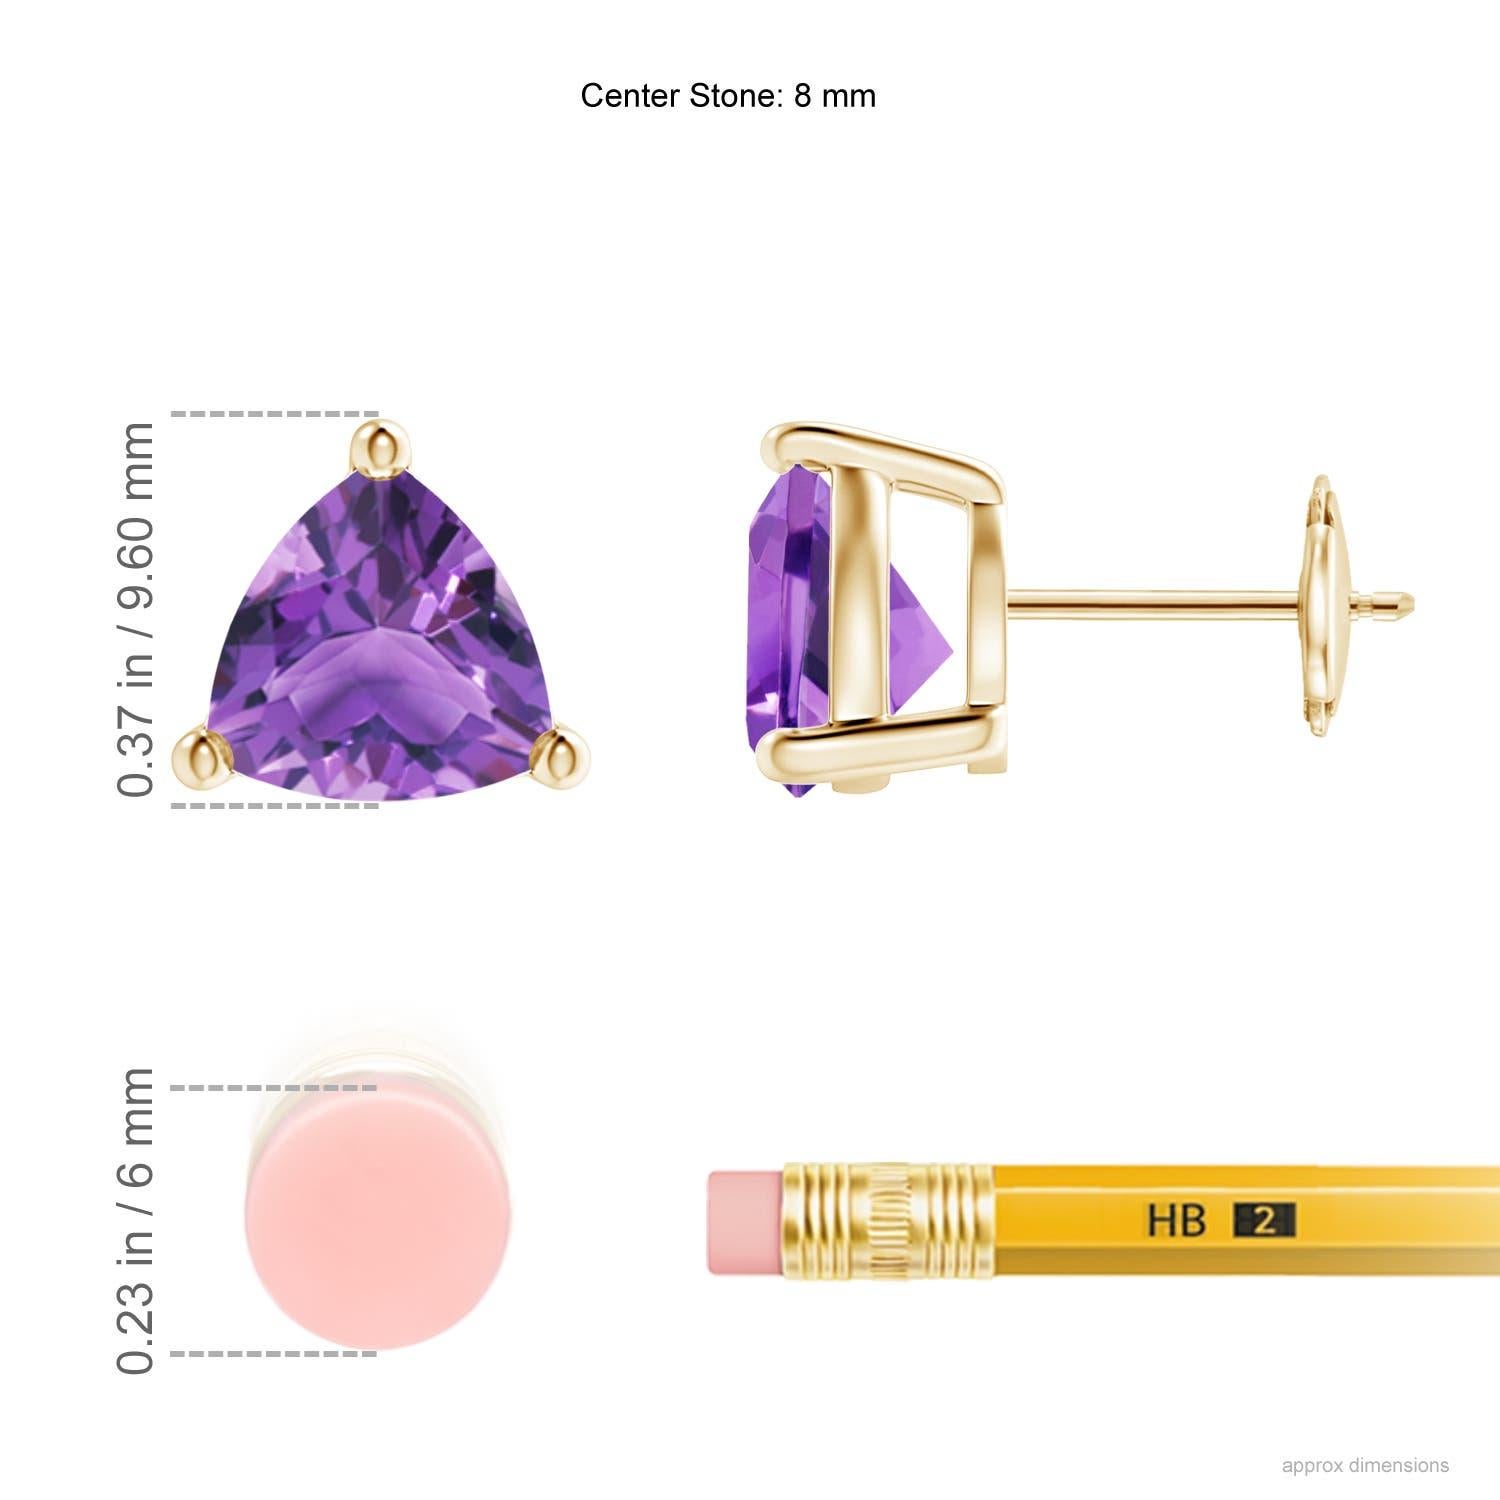 Displaying the royal purple amethysts in a prong setting, these solitaire stud earrings are a pair of enviable beauty. The gemstones are cut in a striking trillion shape and mounted in 14k yellow gold.